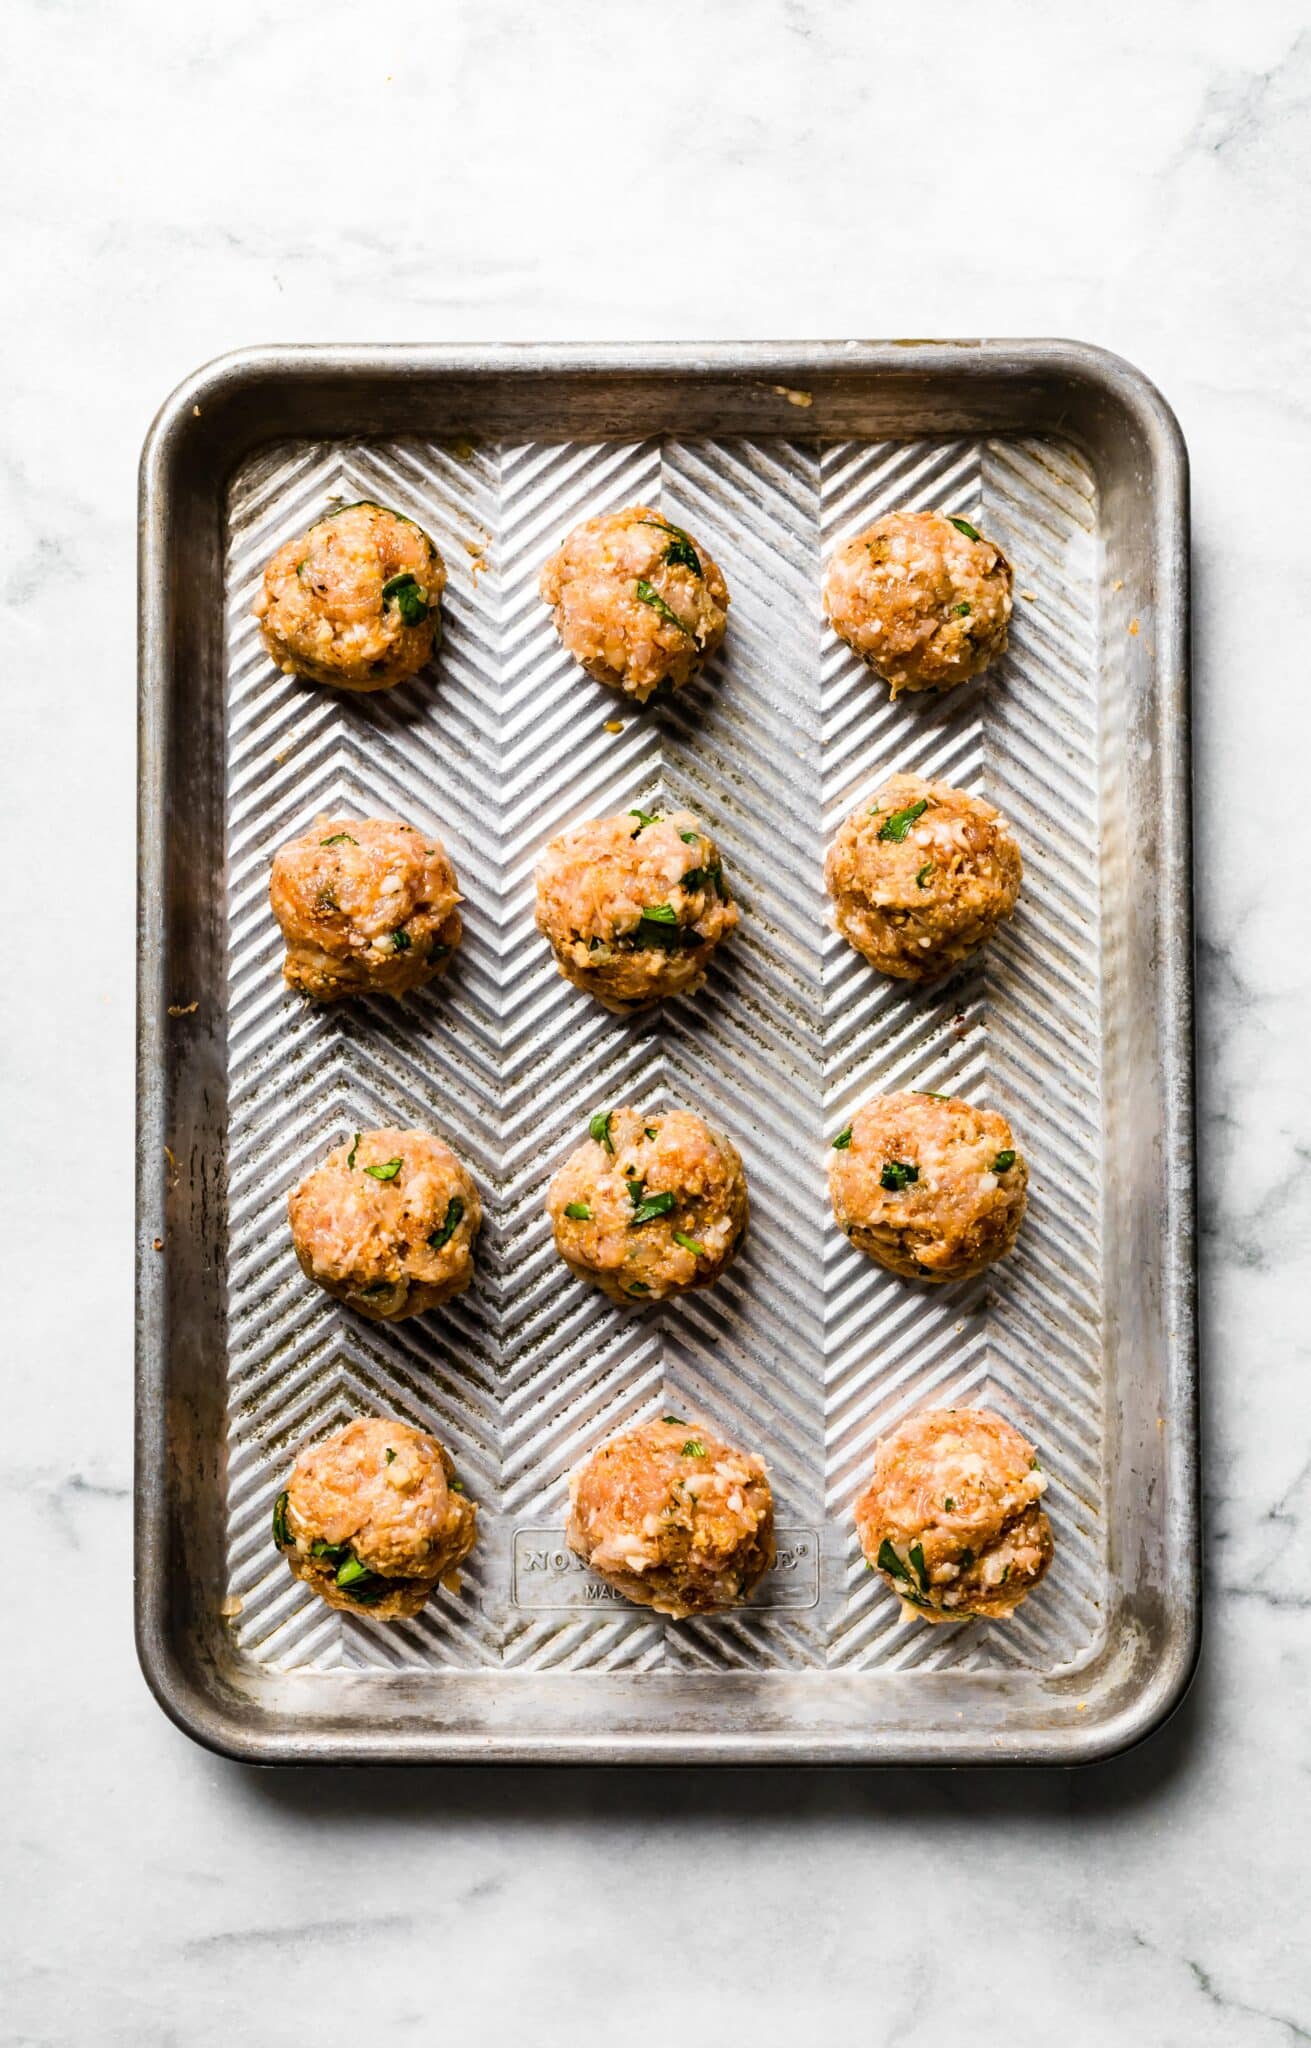 Overhead photo of uncooked chicken meatballs on a baking sheet.